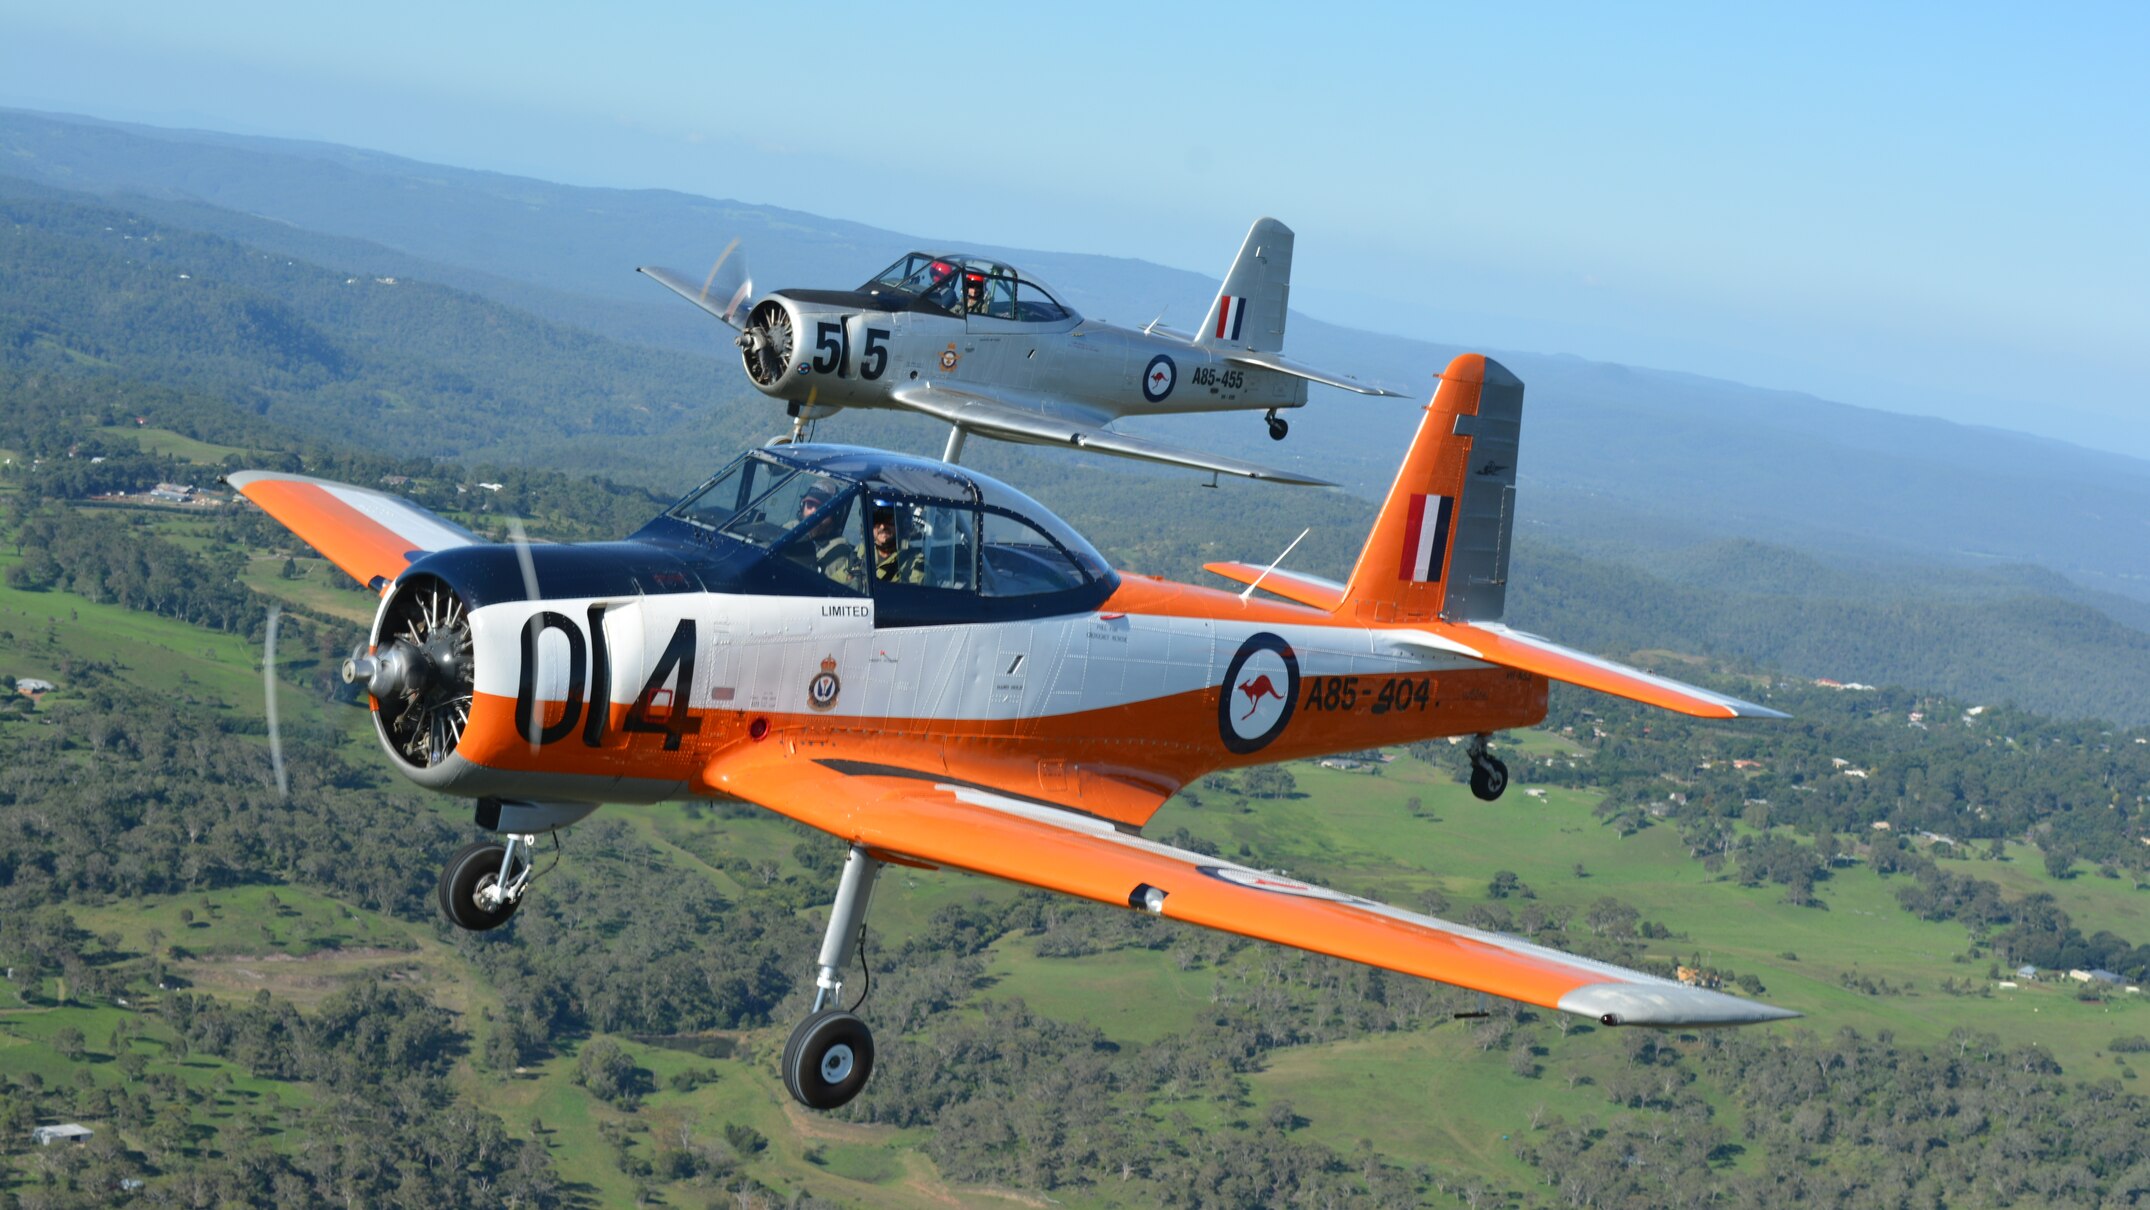 anzac day flypasts in vintage planes keep australia's aviation history alive